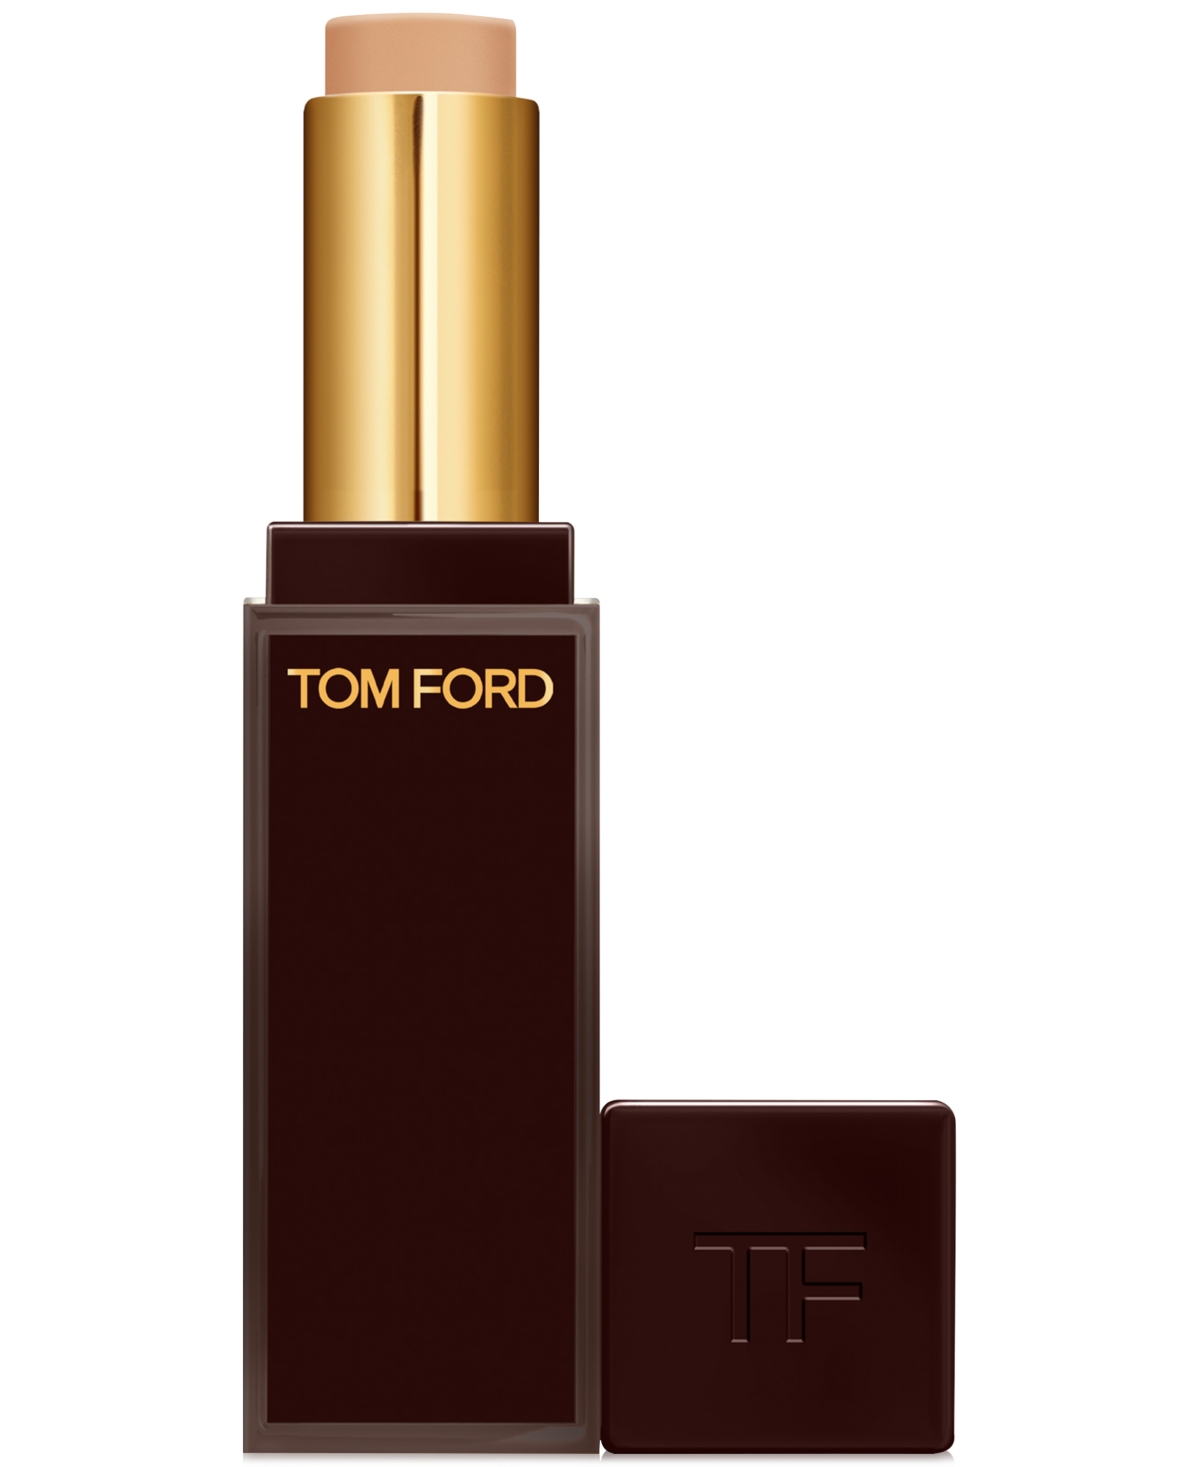 Tom Ford Traceless Soft Matte Concealer In W Latte (medium Skin With Peach Underton